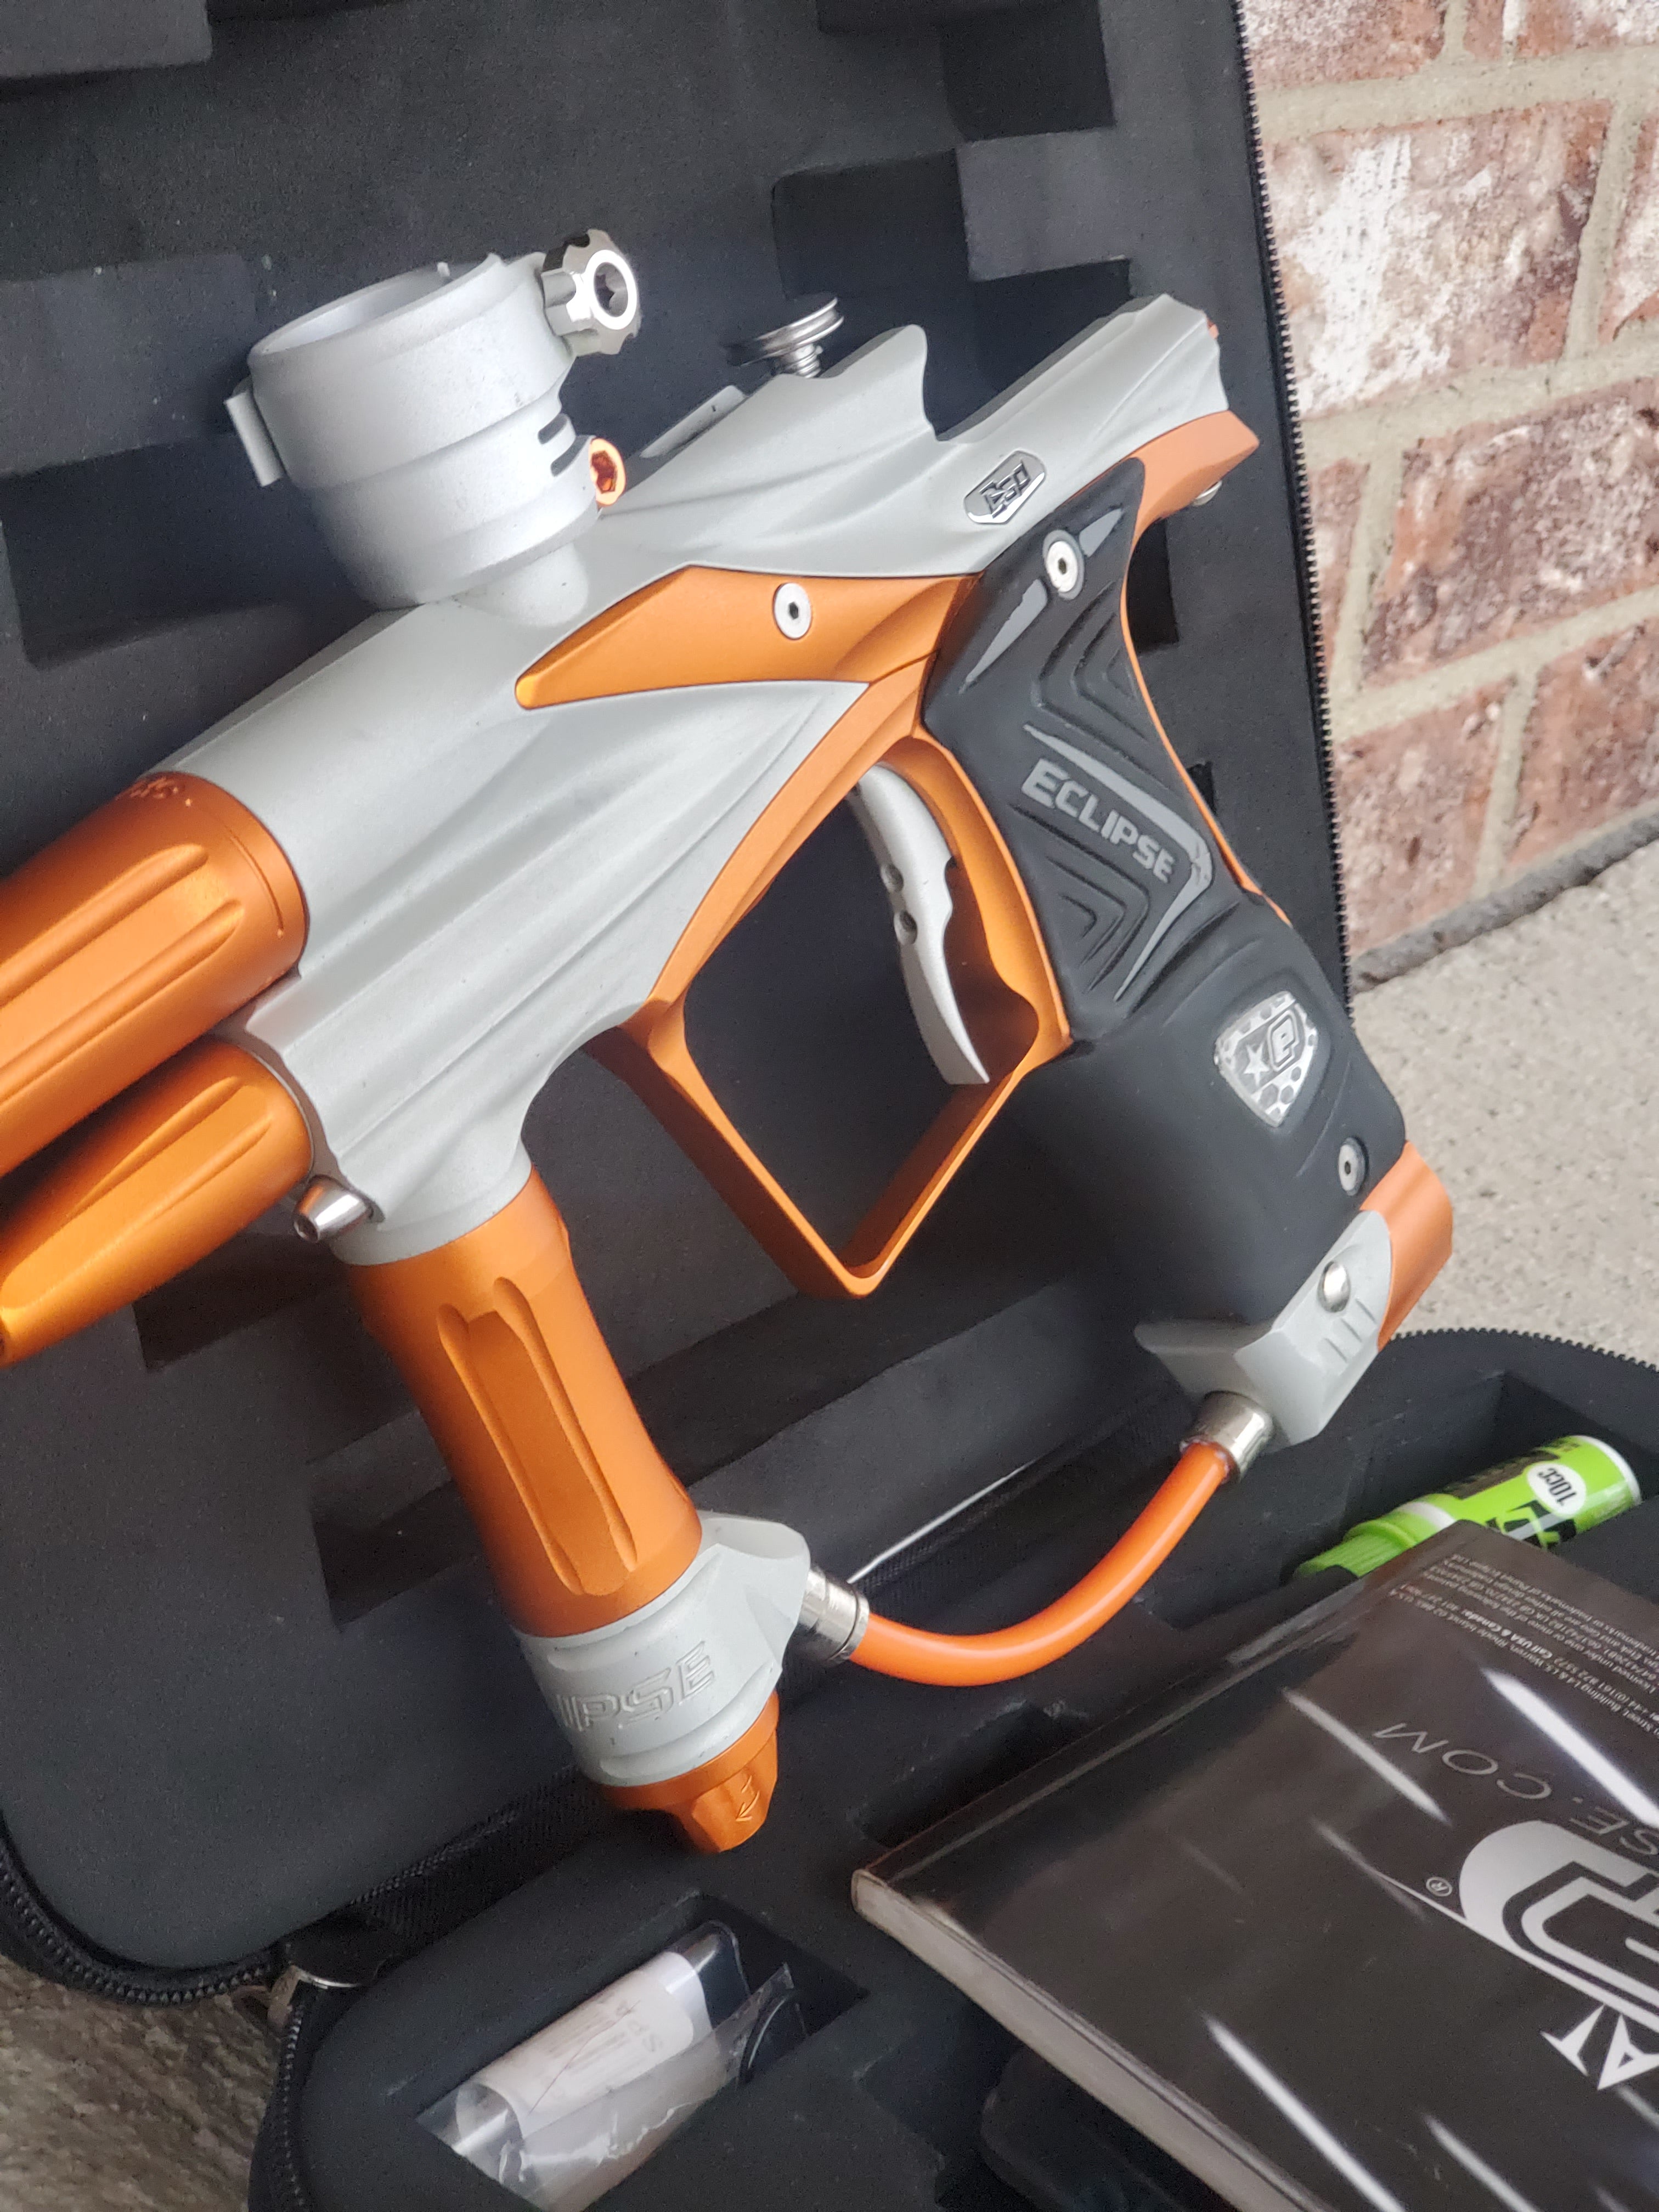 Planet Eclipse Ego LV1.1 for Sale in Hialeah, FL - OfferUp